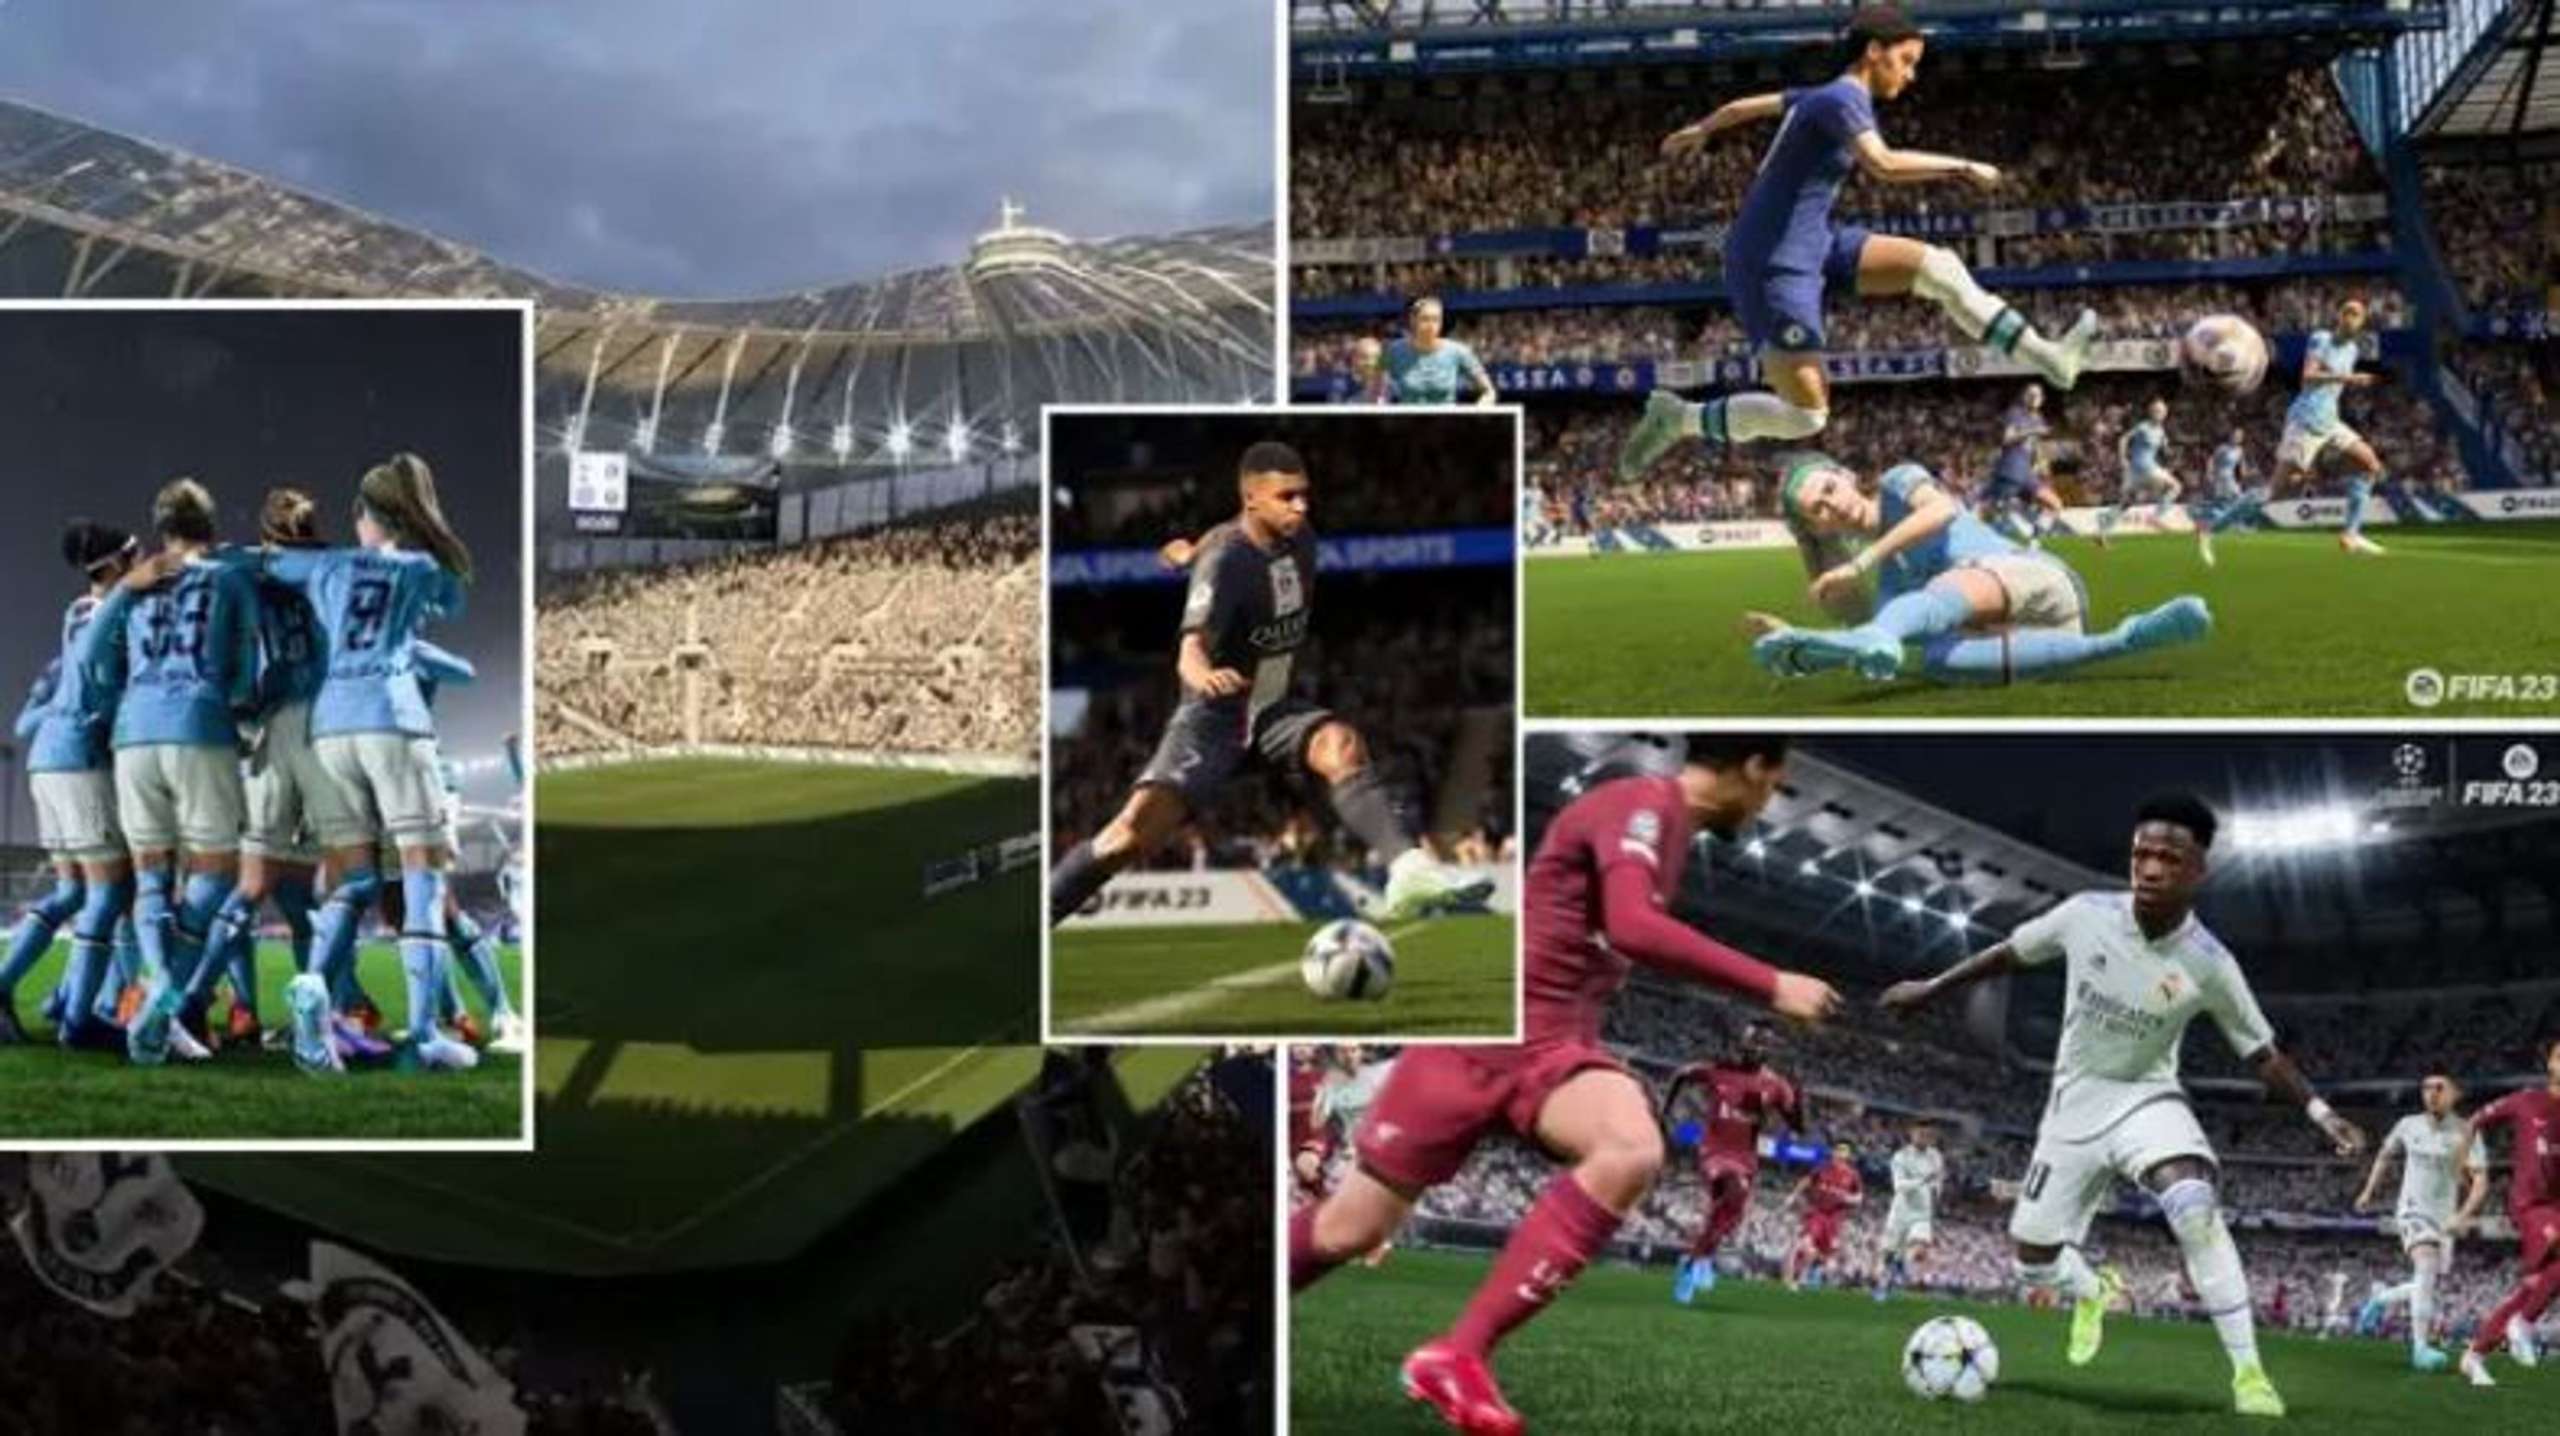 According To EA, FIFA 23 Will Be Released On September 30 And Will Include Women’s Clubs For The First Time, Same Generation Cross-Play, World Cup DLC, And More.